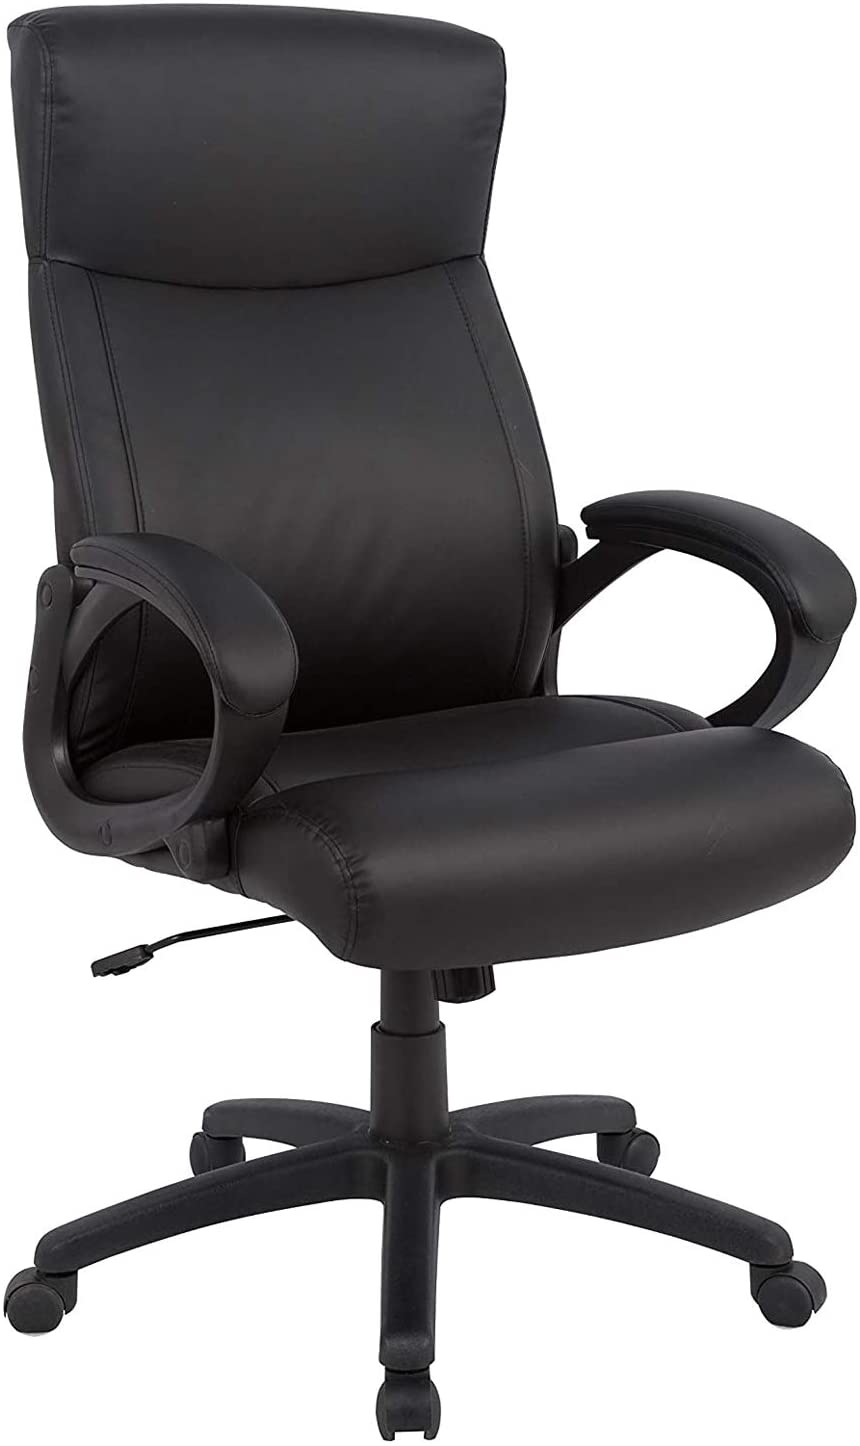 HLC-0311L-1-21 Office Chair Ergonomic Desk Chair with Padded Armrests, Executive PU Leather  Chair High Back Adjustable Swivel Task Chair